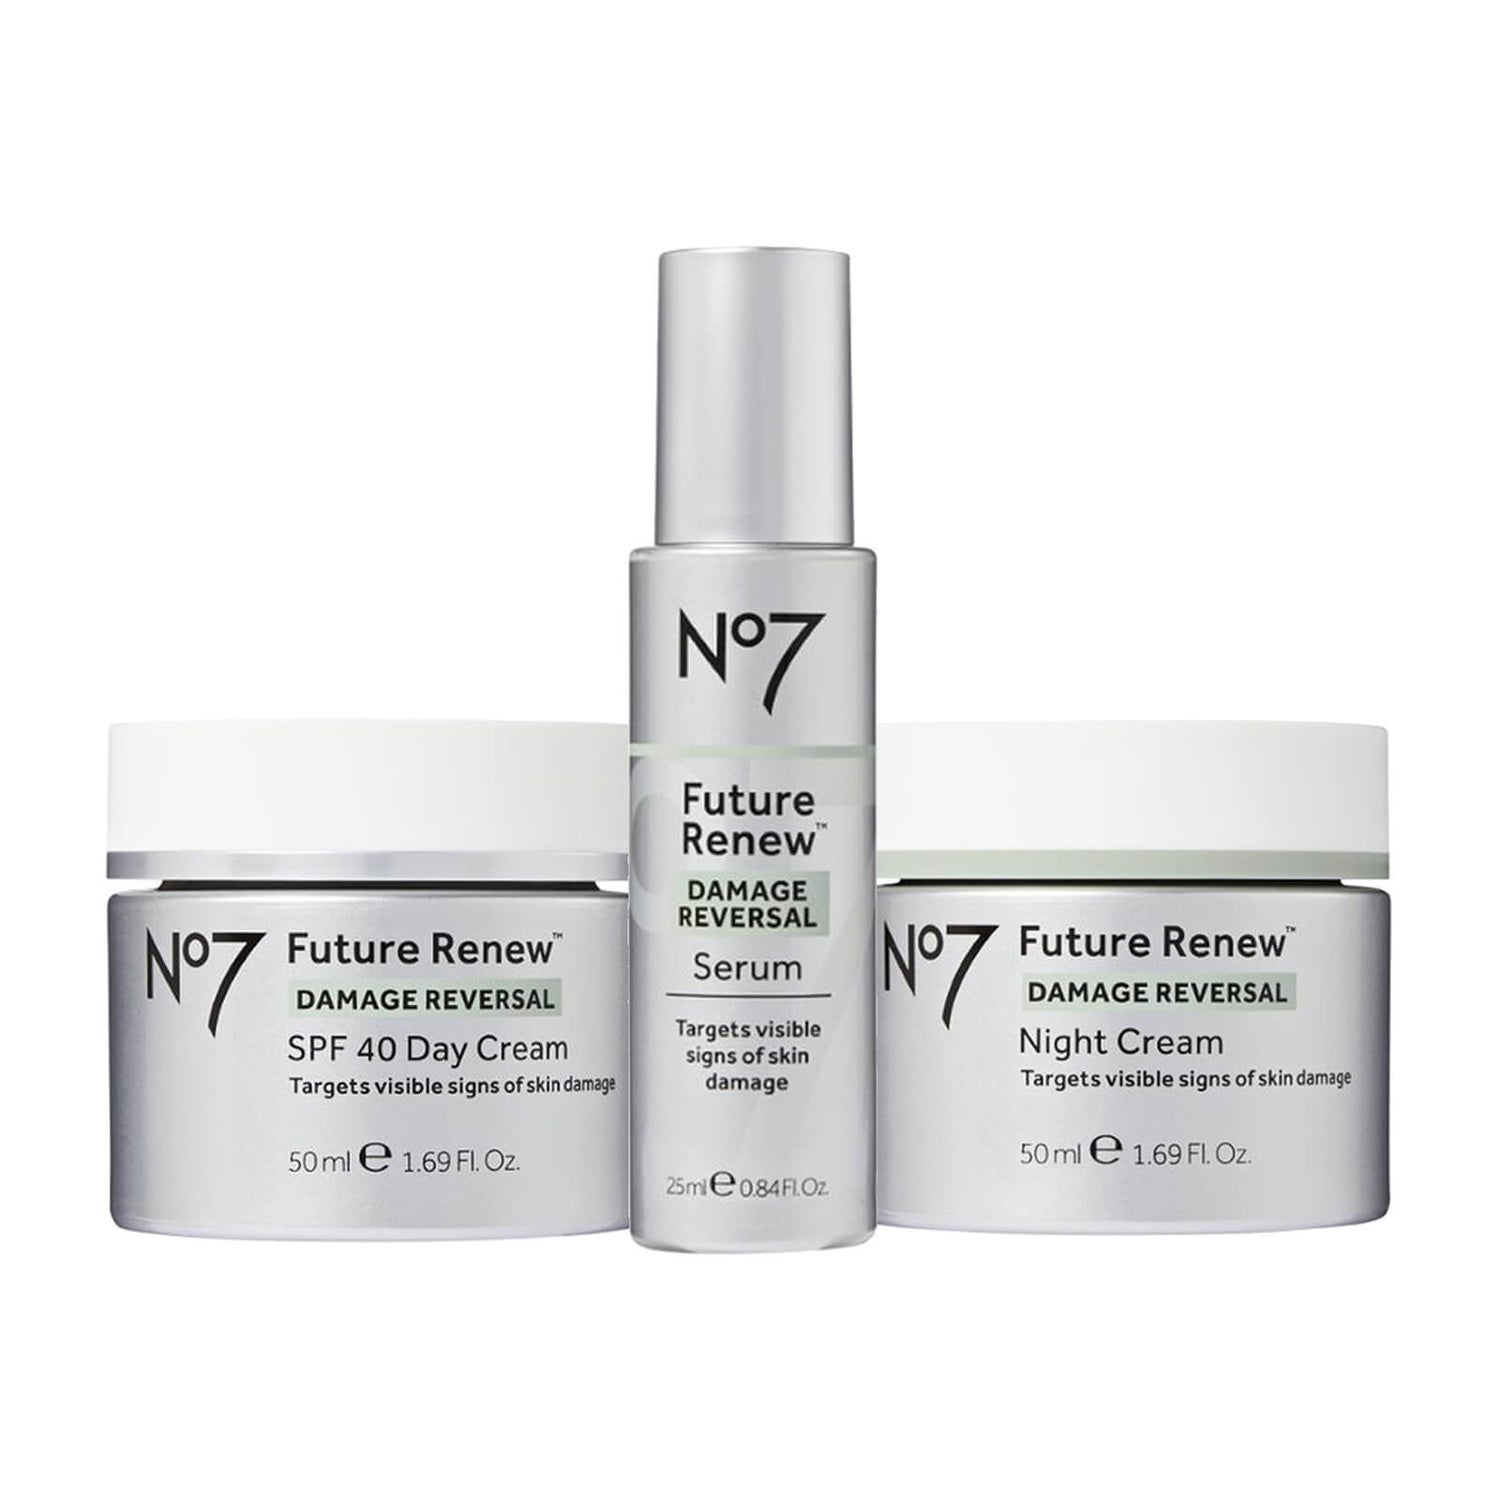 Future Renew Damage Reversal Kit for Fine Lines & Wrinkles and Skin Looks Brighter & Firmer